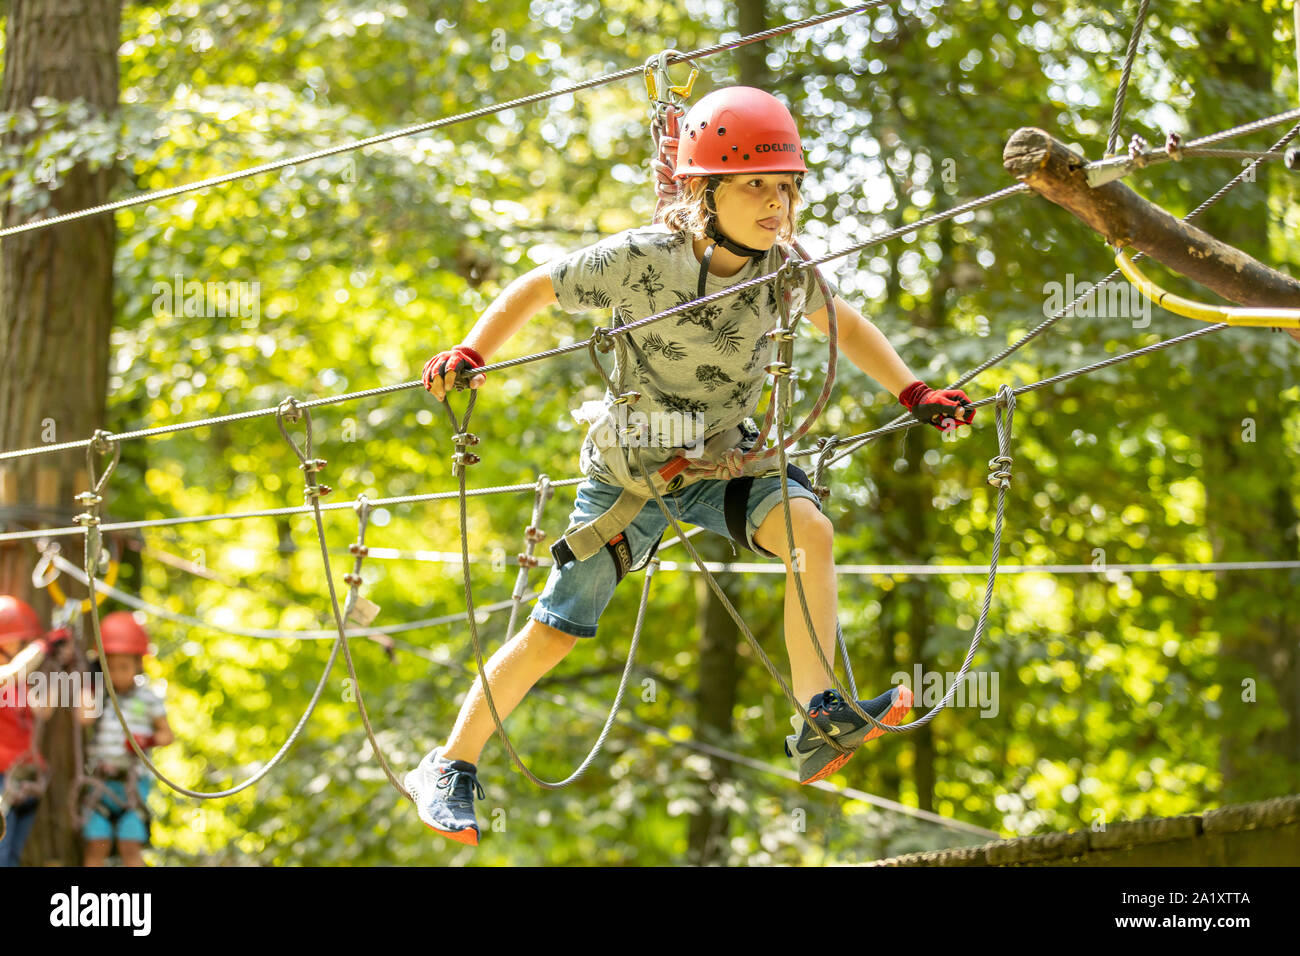 Climbing garden, climbing course, boy, 9 years old, with helmet and harness, on a climbing course in a forest, Stock Photo